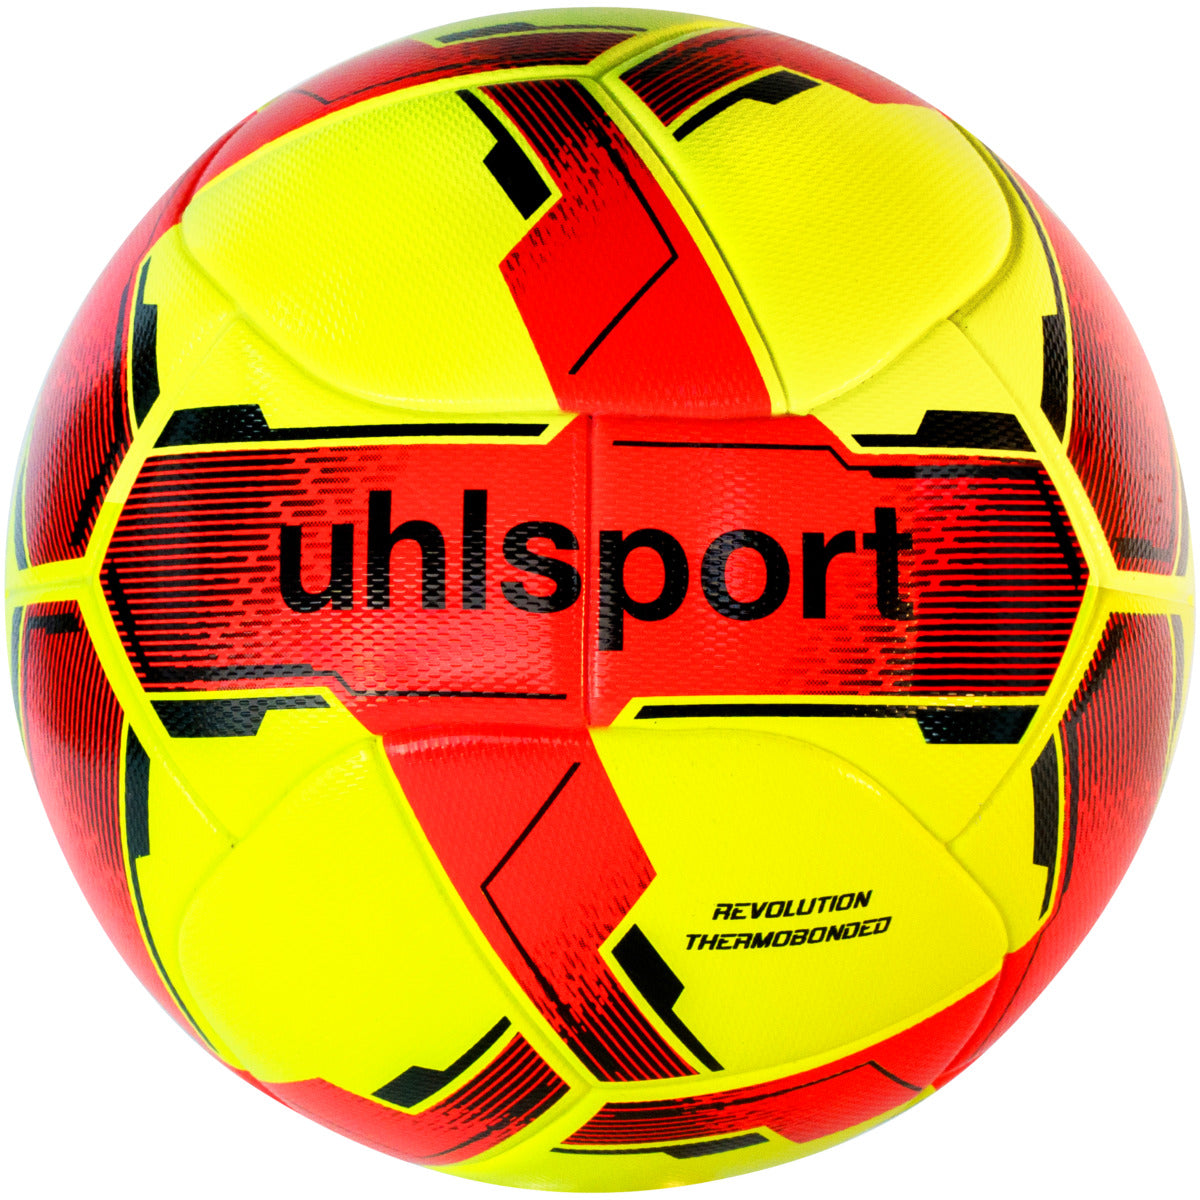 Uhlsport Revolution Thermobonded - Fluo Yellow/Fluo Orange/Black